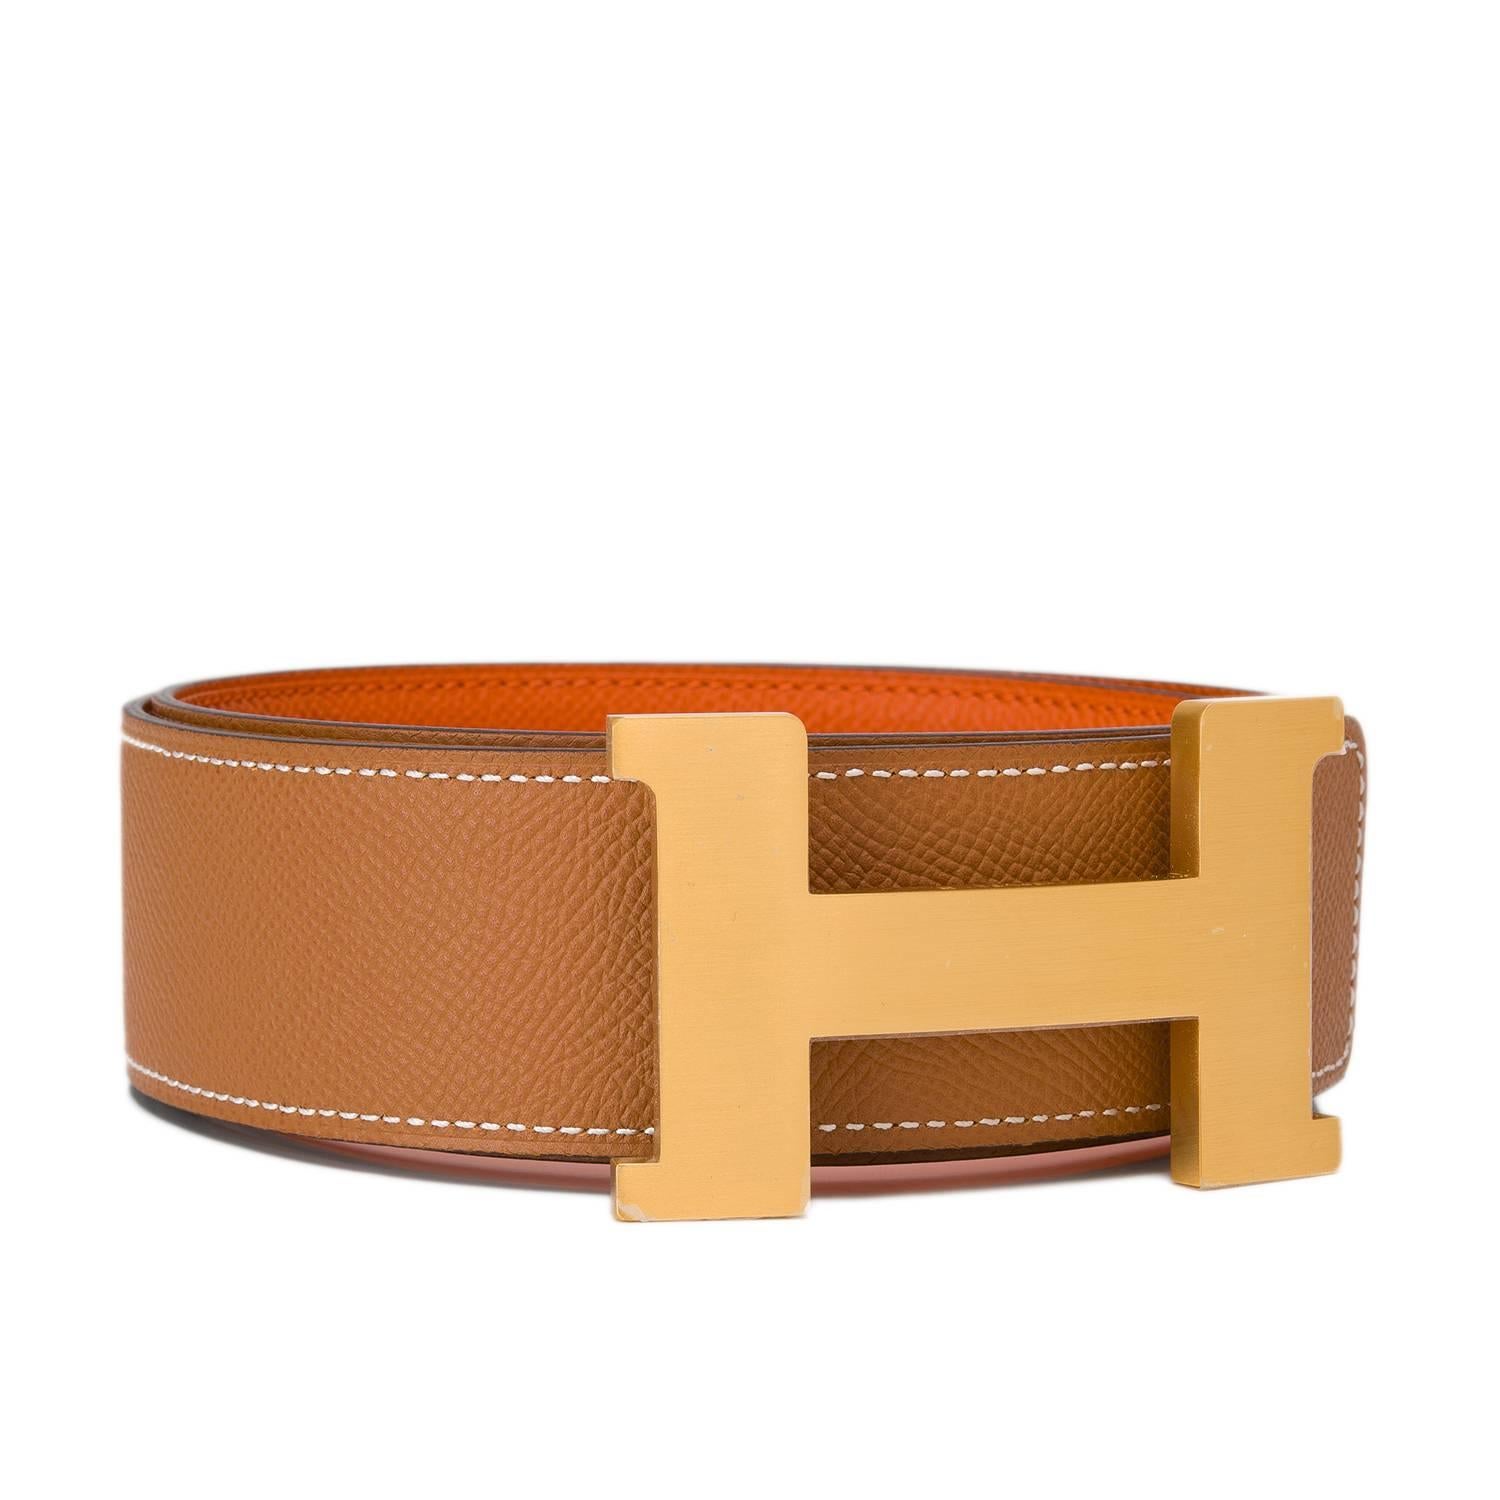 Hermes belt kit comprising an adjustable wide 42mm Constance H belt of Orange epsom with tonal stitching reversing to Gold calfskin with tonal stitching accompanied by a removable brushed gold H buckle.

Origin: France

Condition: Pristine,